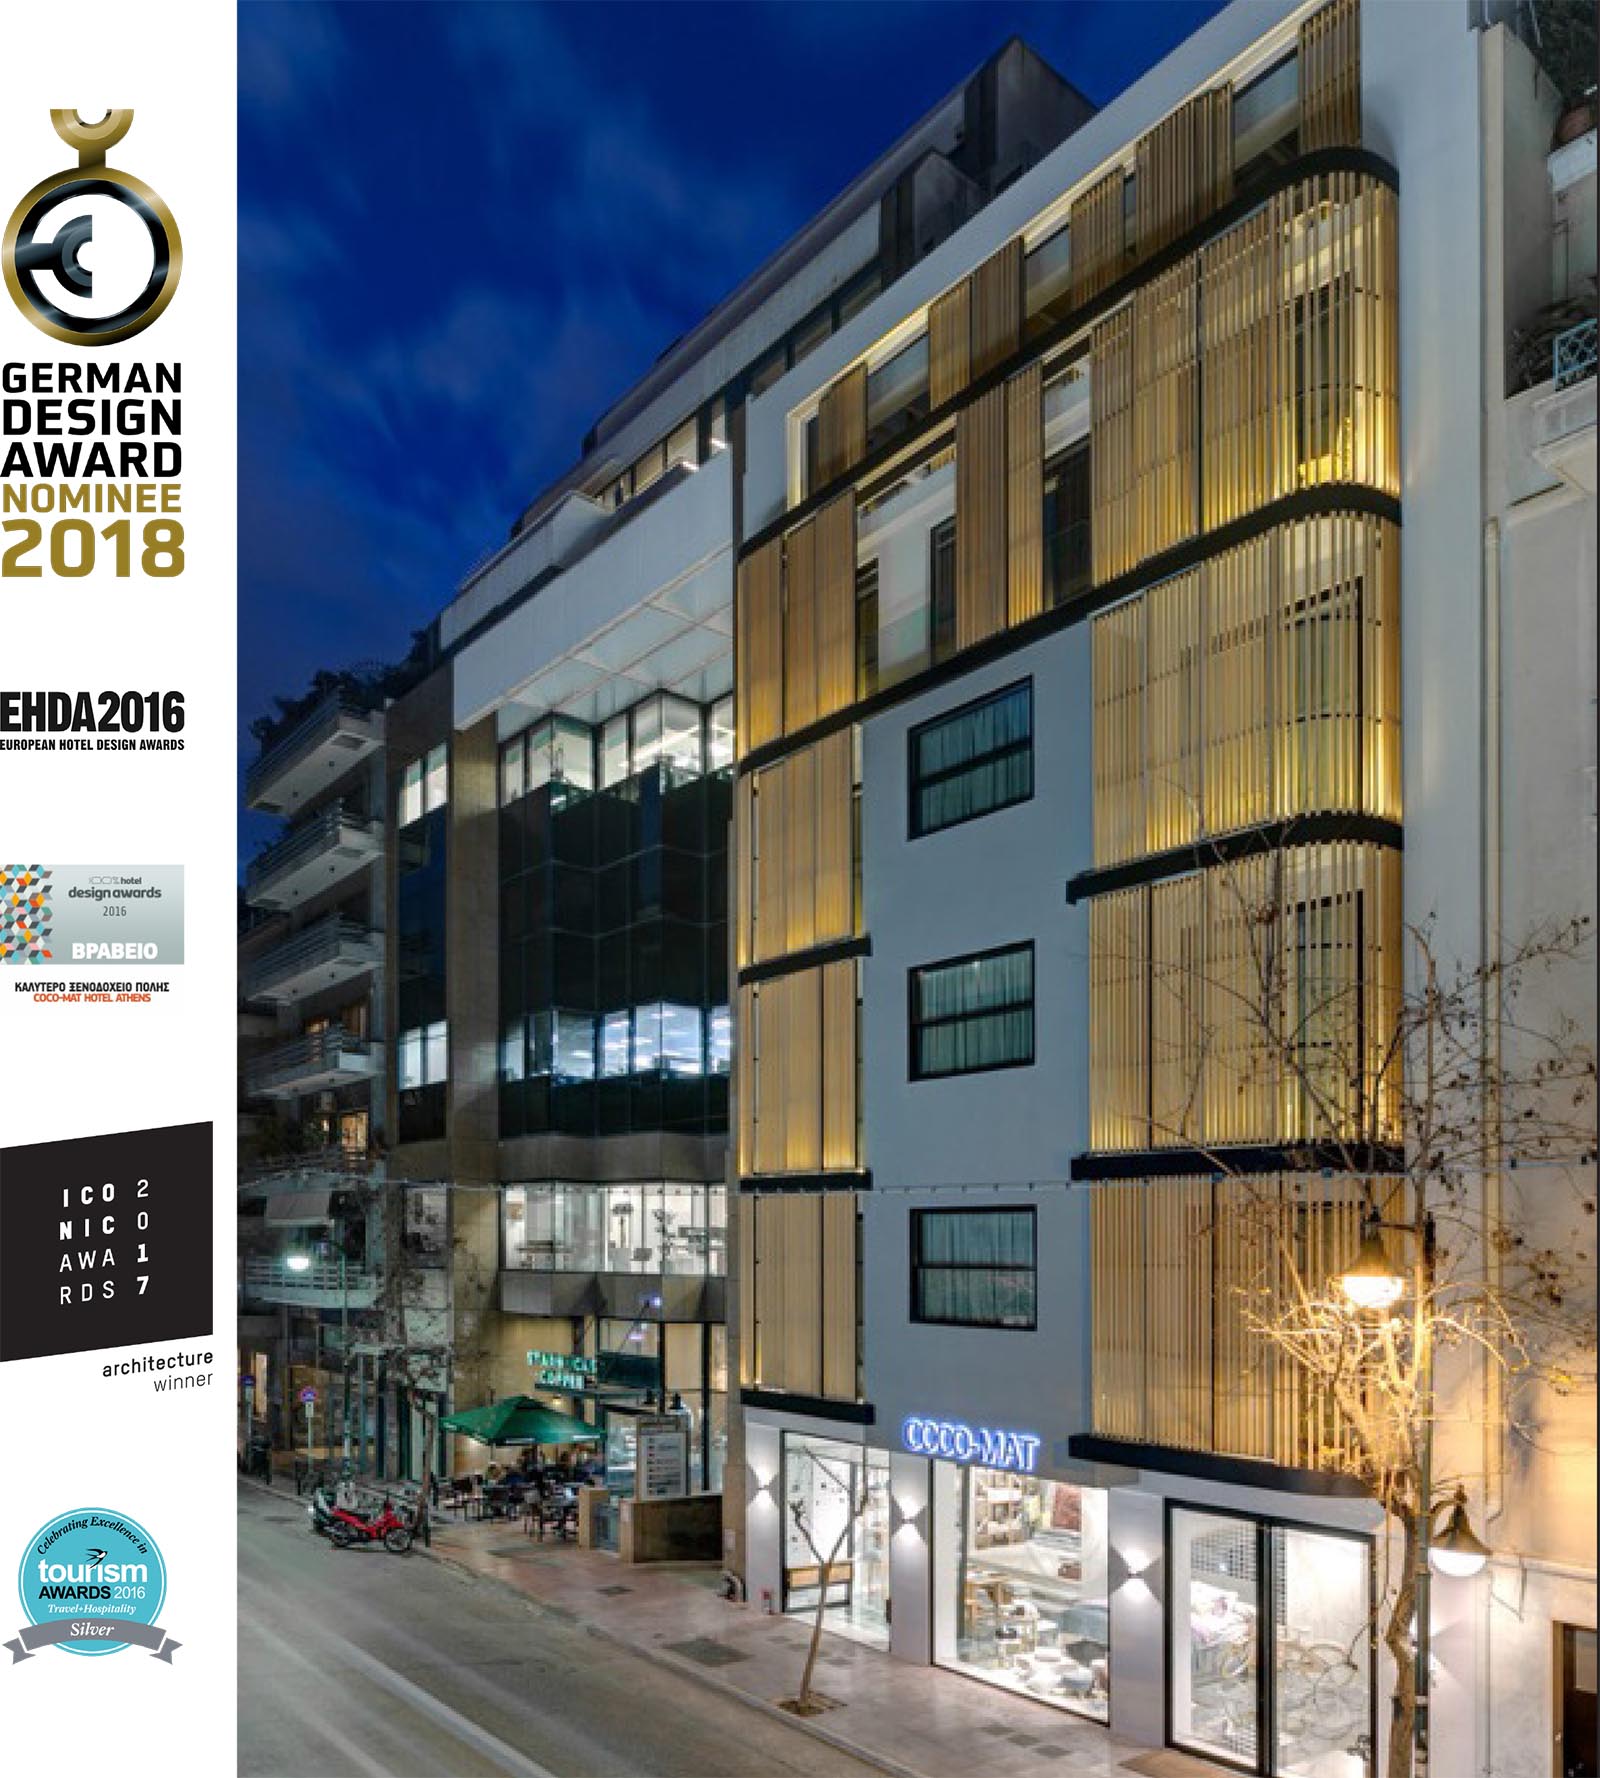 Archisearch COCO-MAT Hotel Athens by Elastic Architects / Iconic Awards 2017 WINNER & German Design Awards 2018 NOMINEE